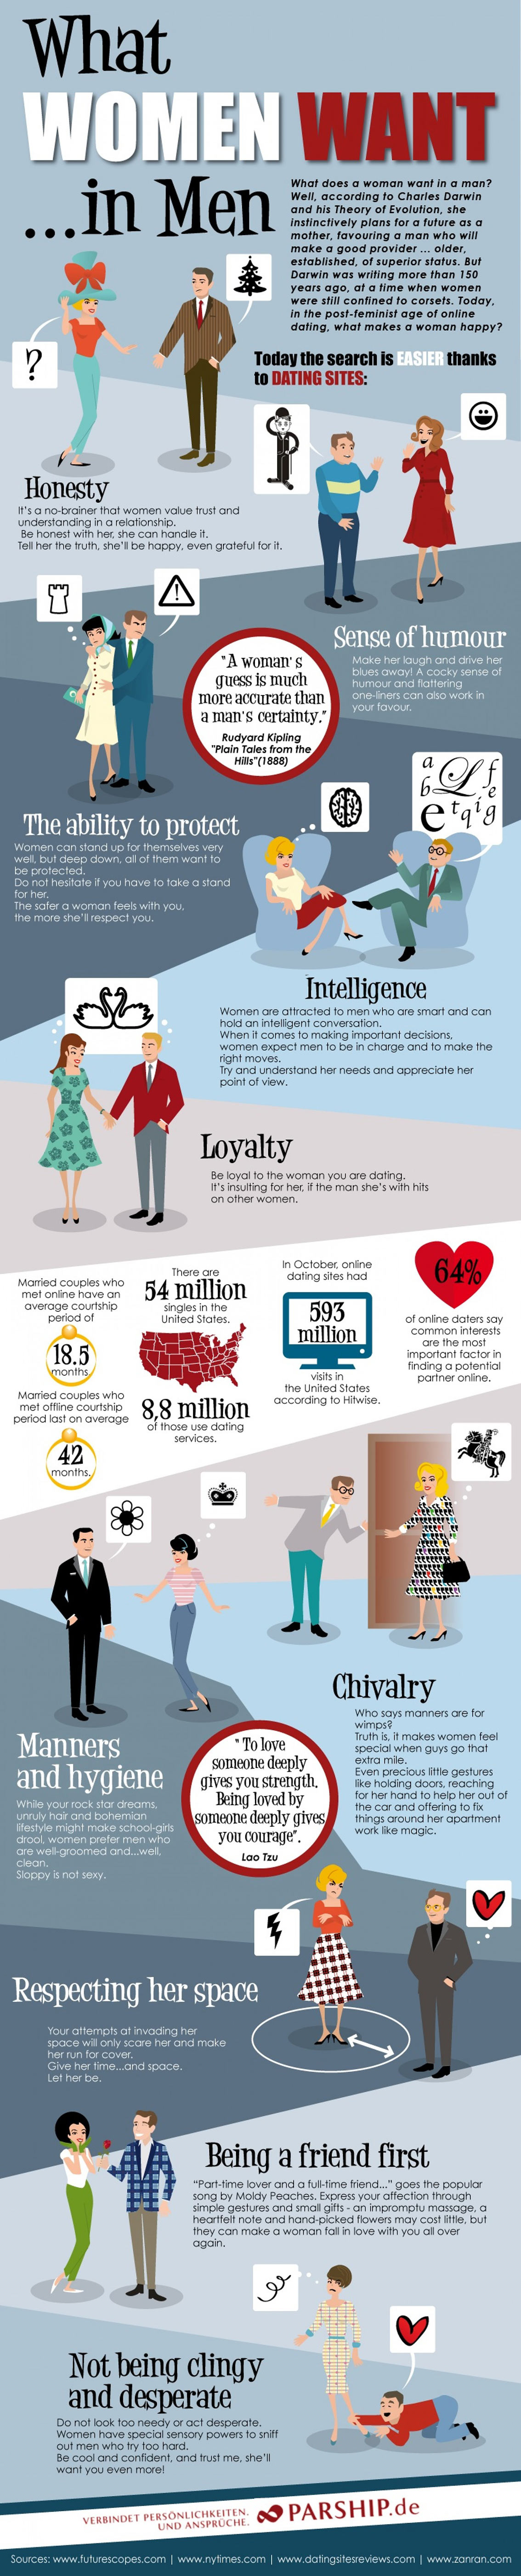 What Women Want in Men - Dating Infographic